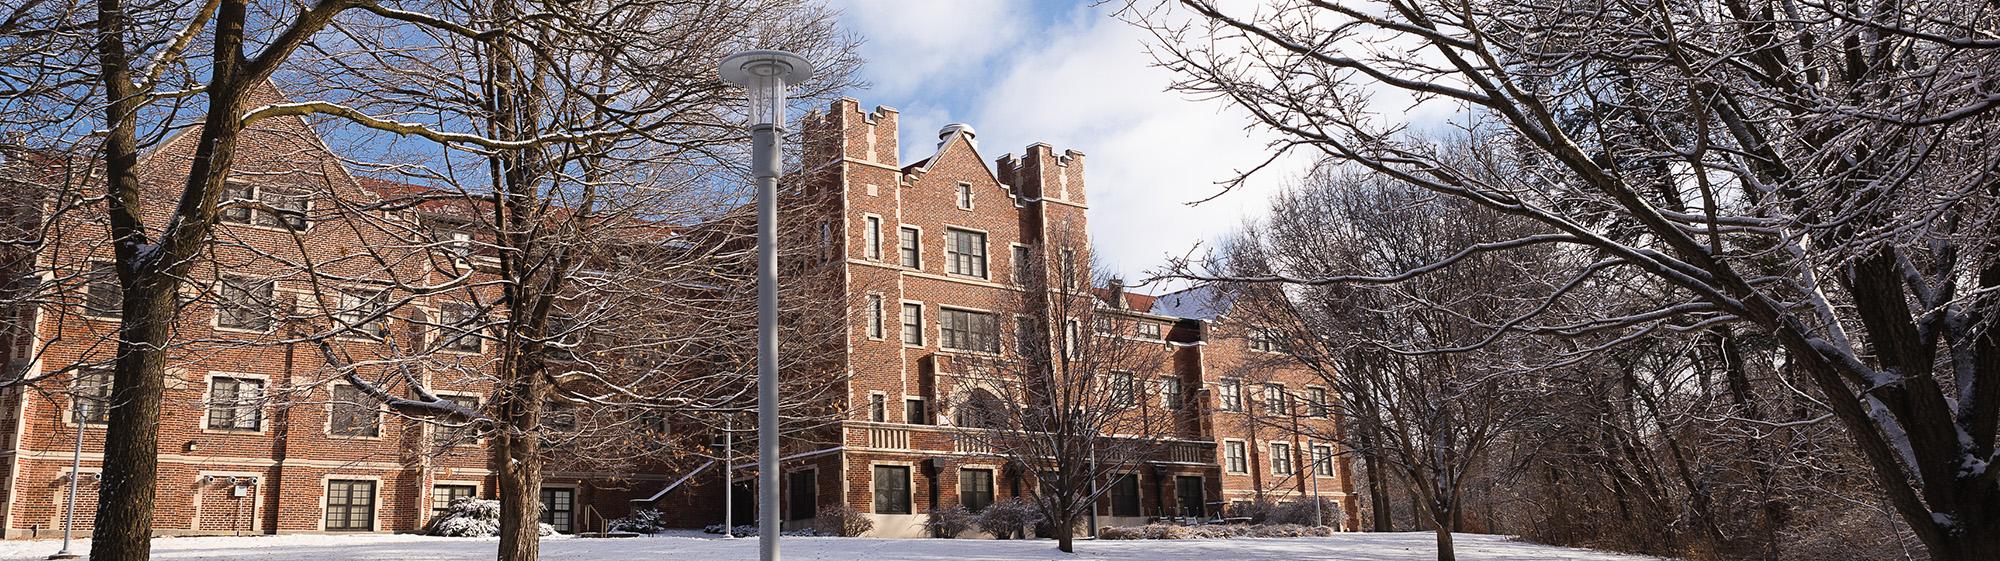 Winter at Frees Hall